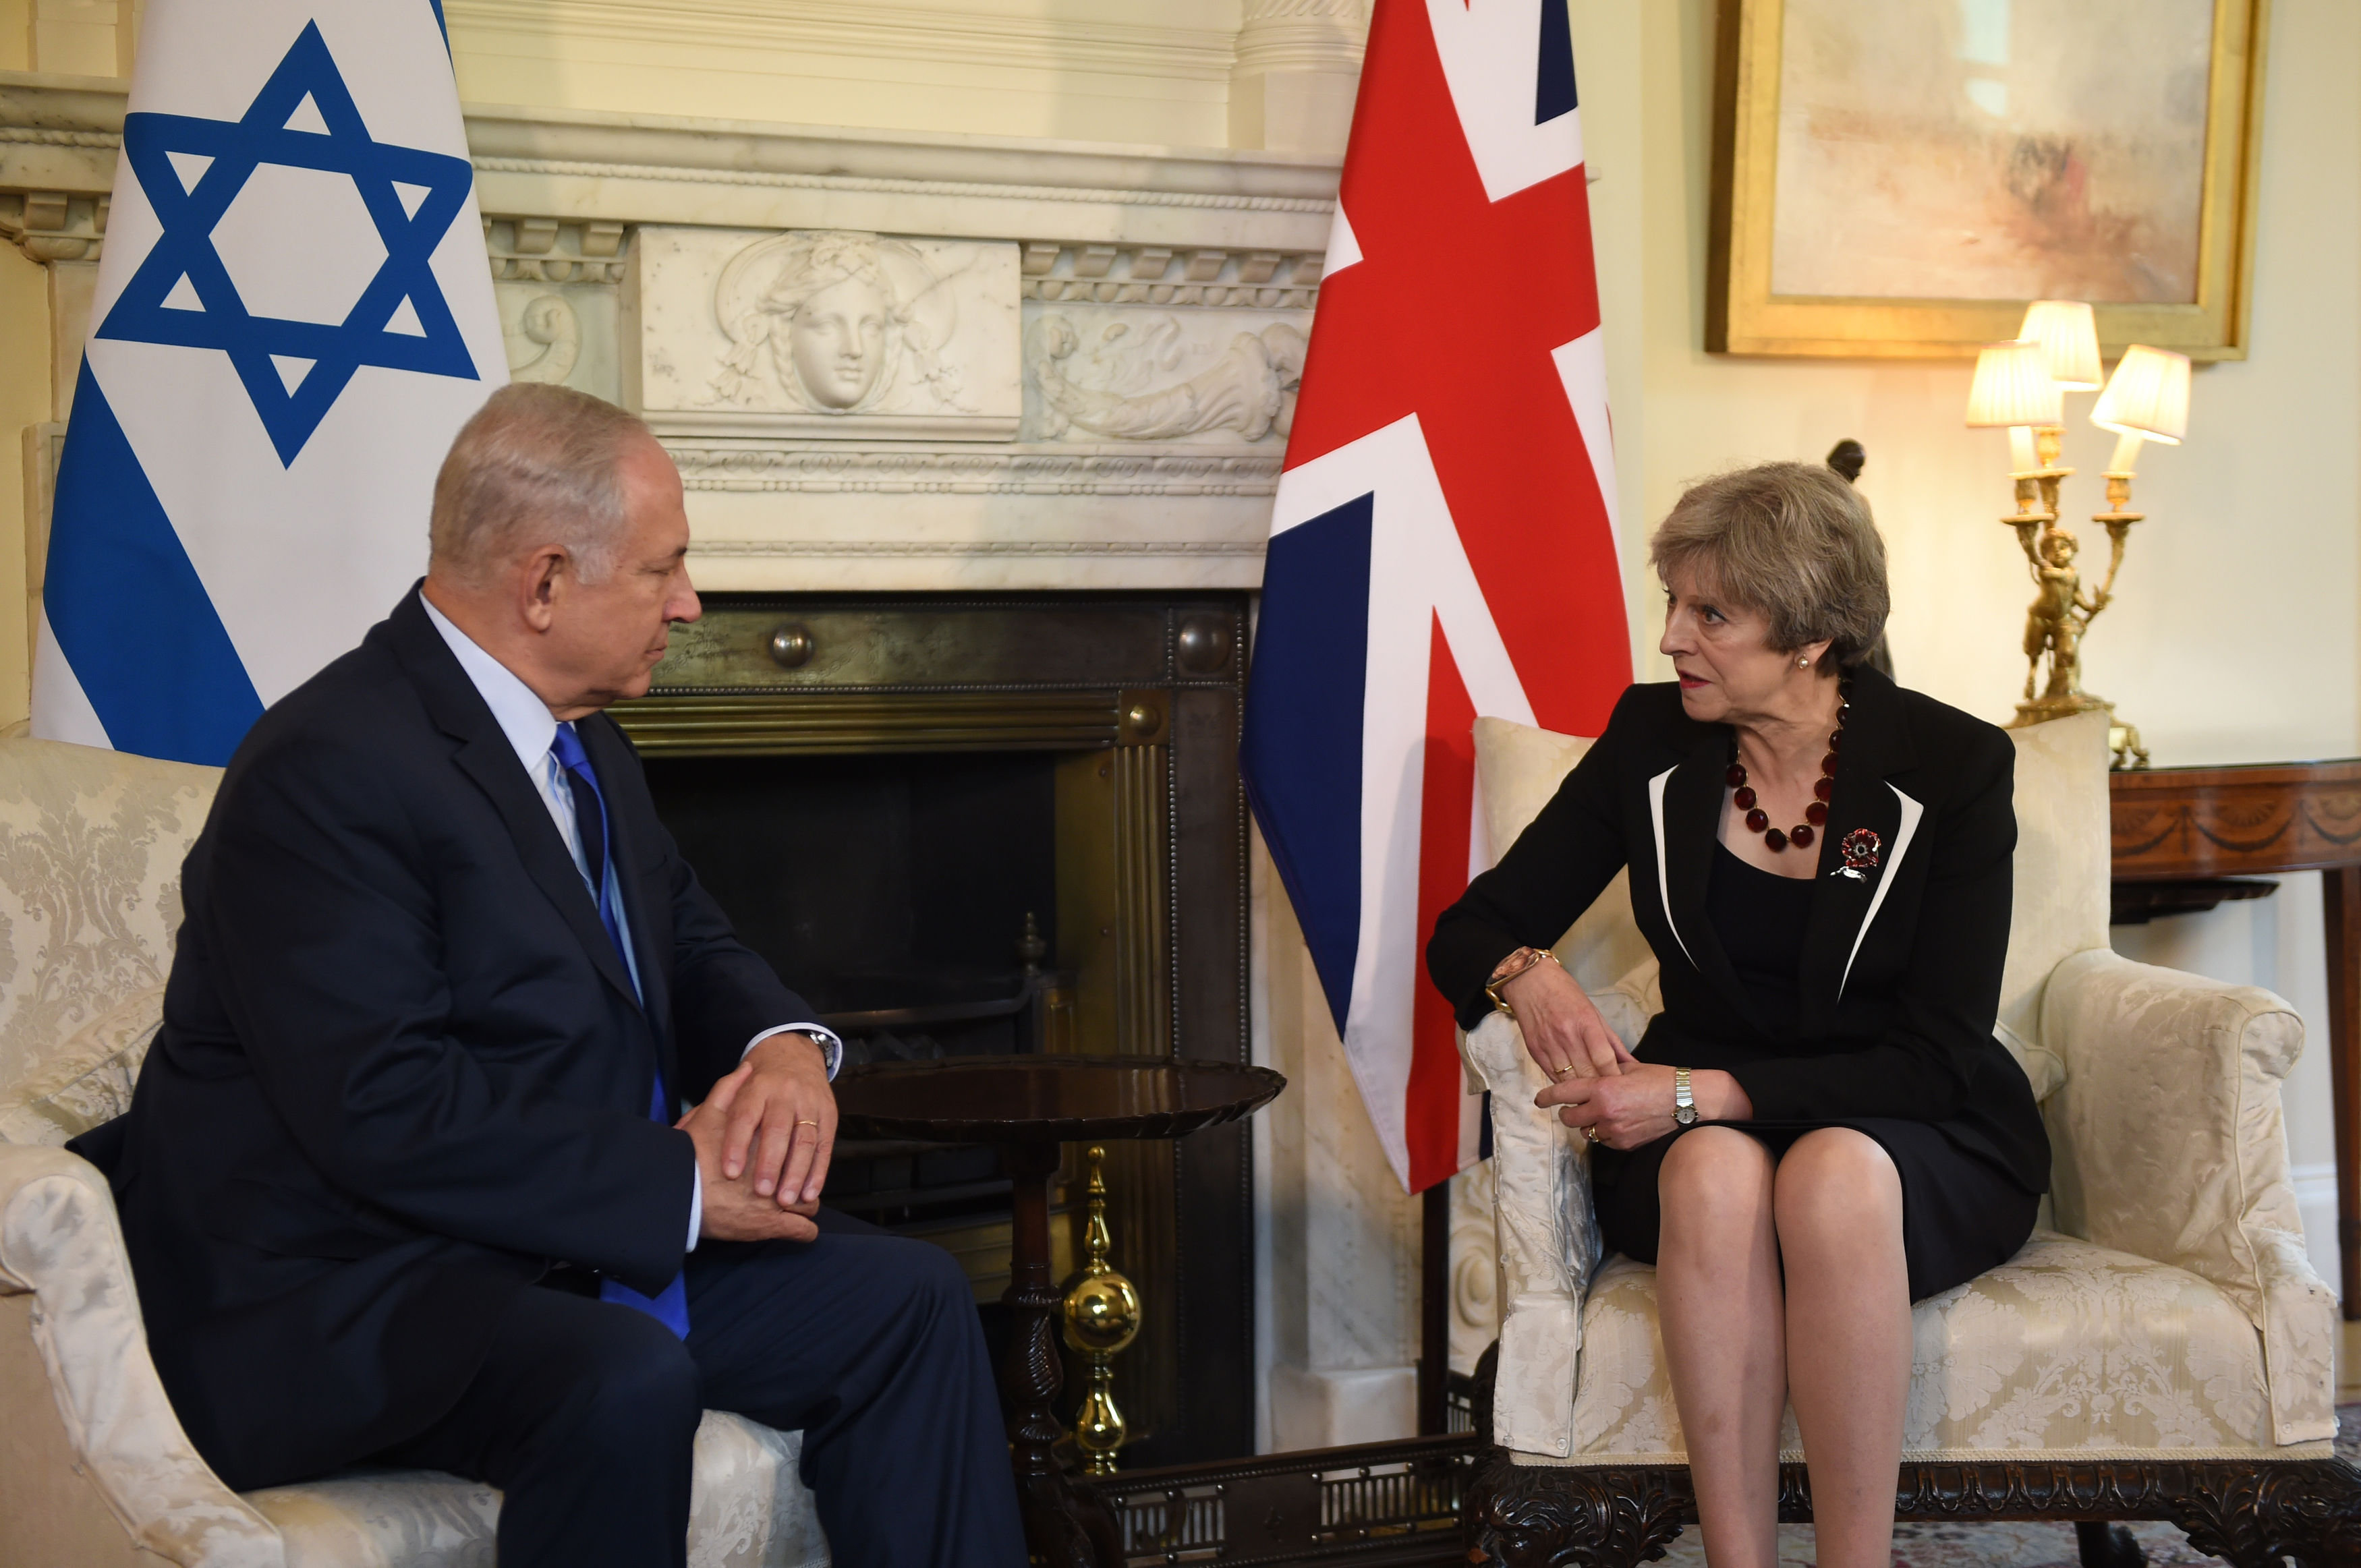 <i>Theresa May did not know that Priti Patel had meetings with the Israeli Prime Minister when she met with him in London last week.</i>